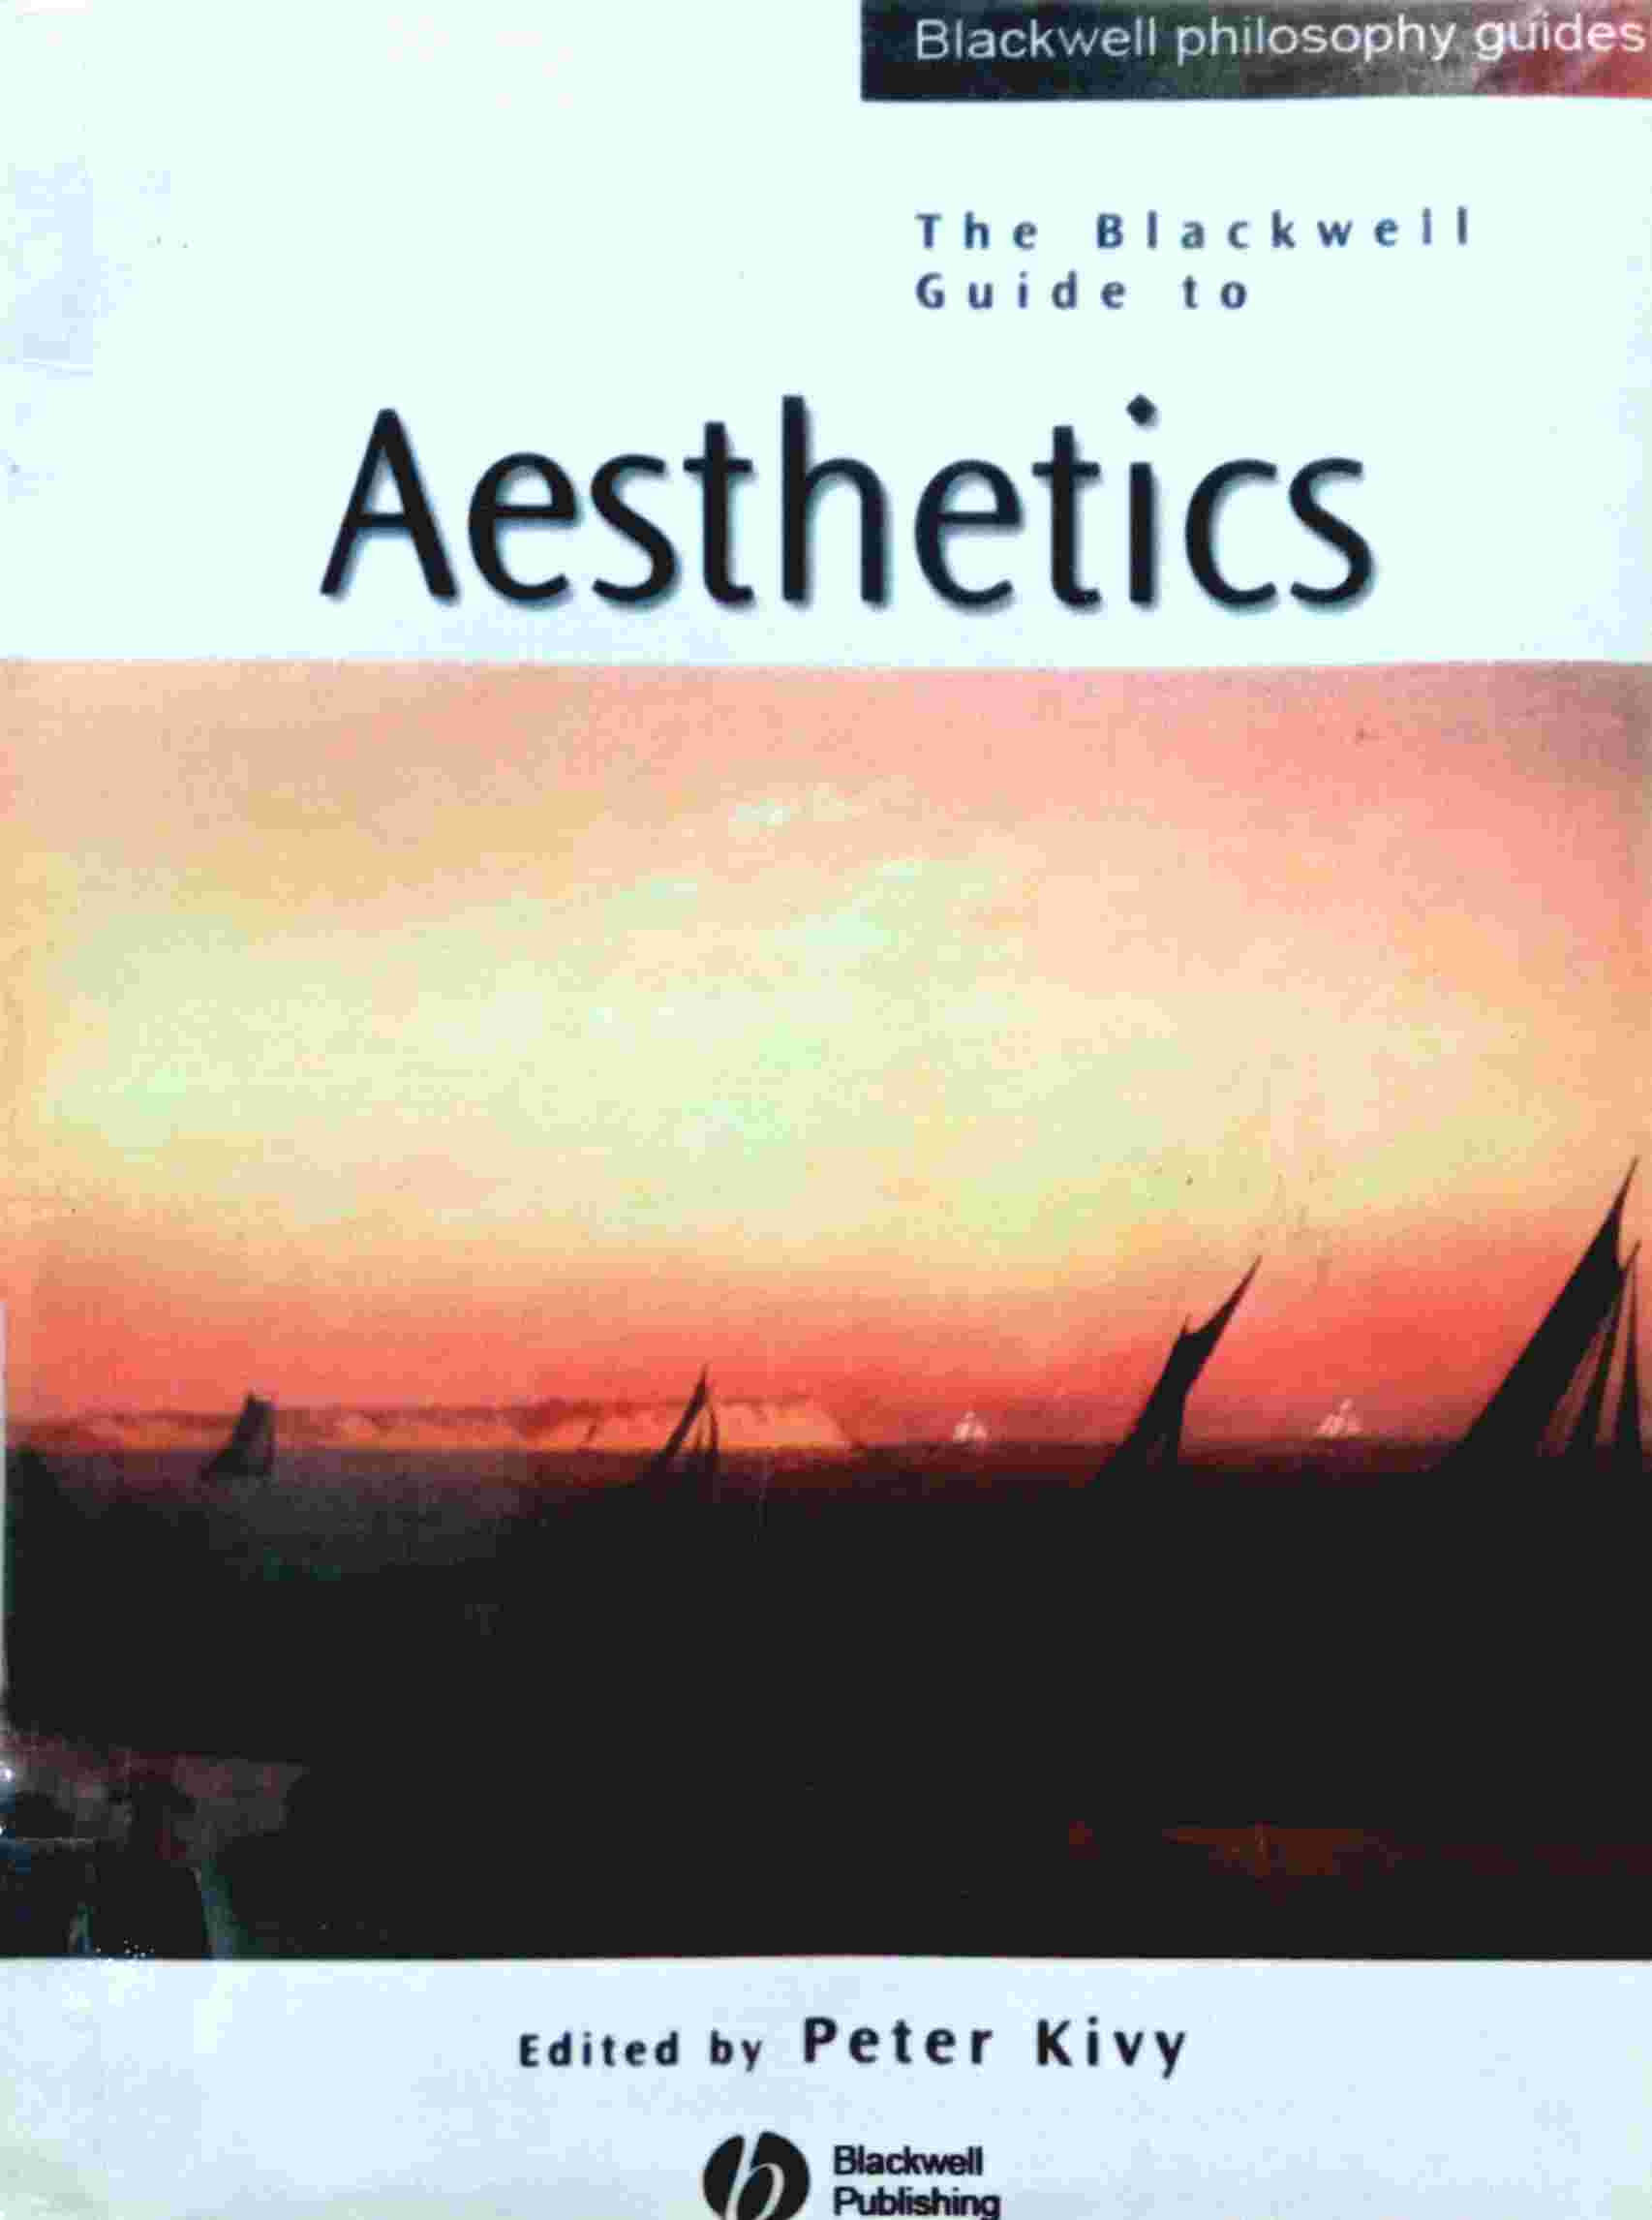 THE BLACKWELL GUIDE TO AESTHETICS